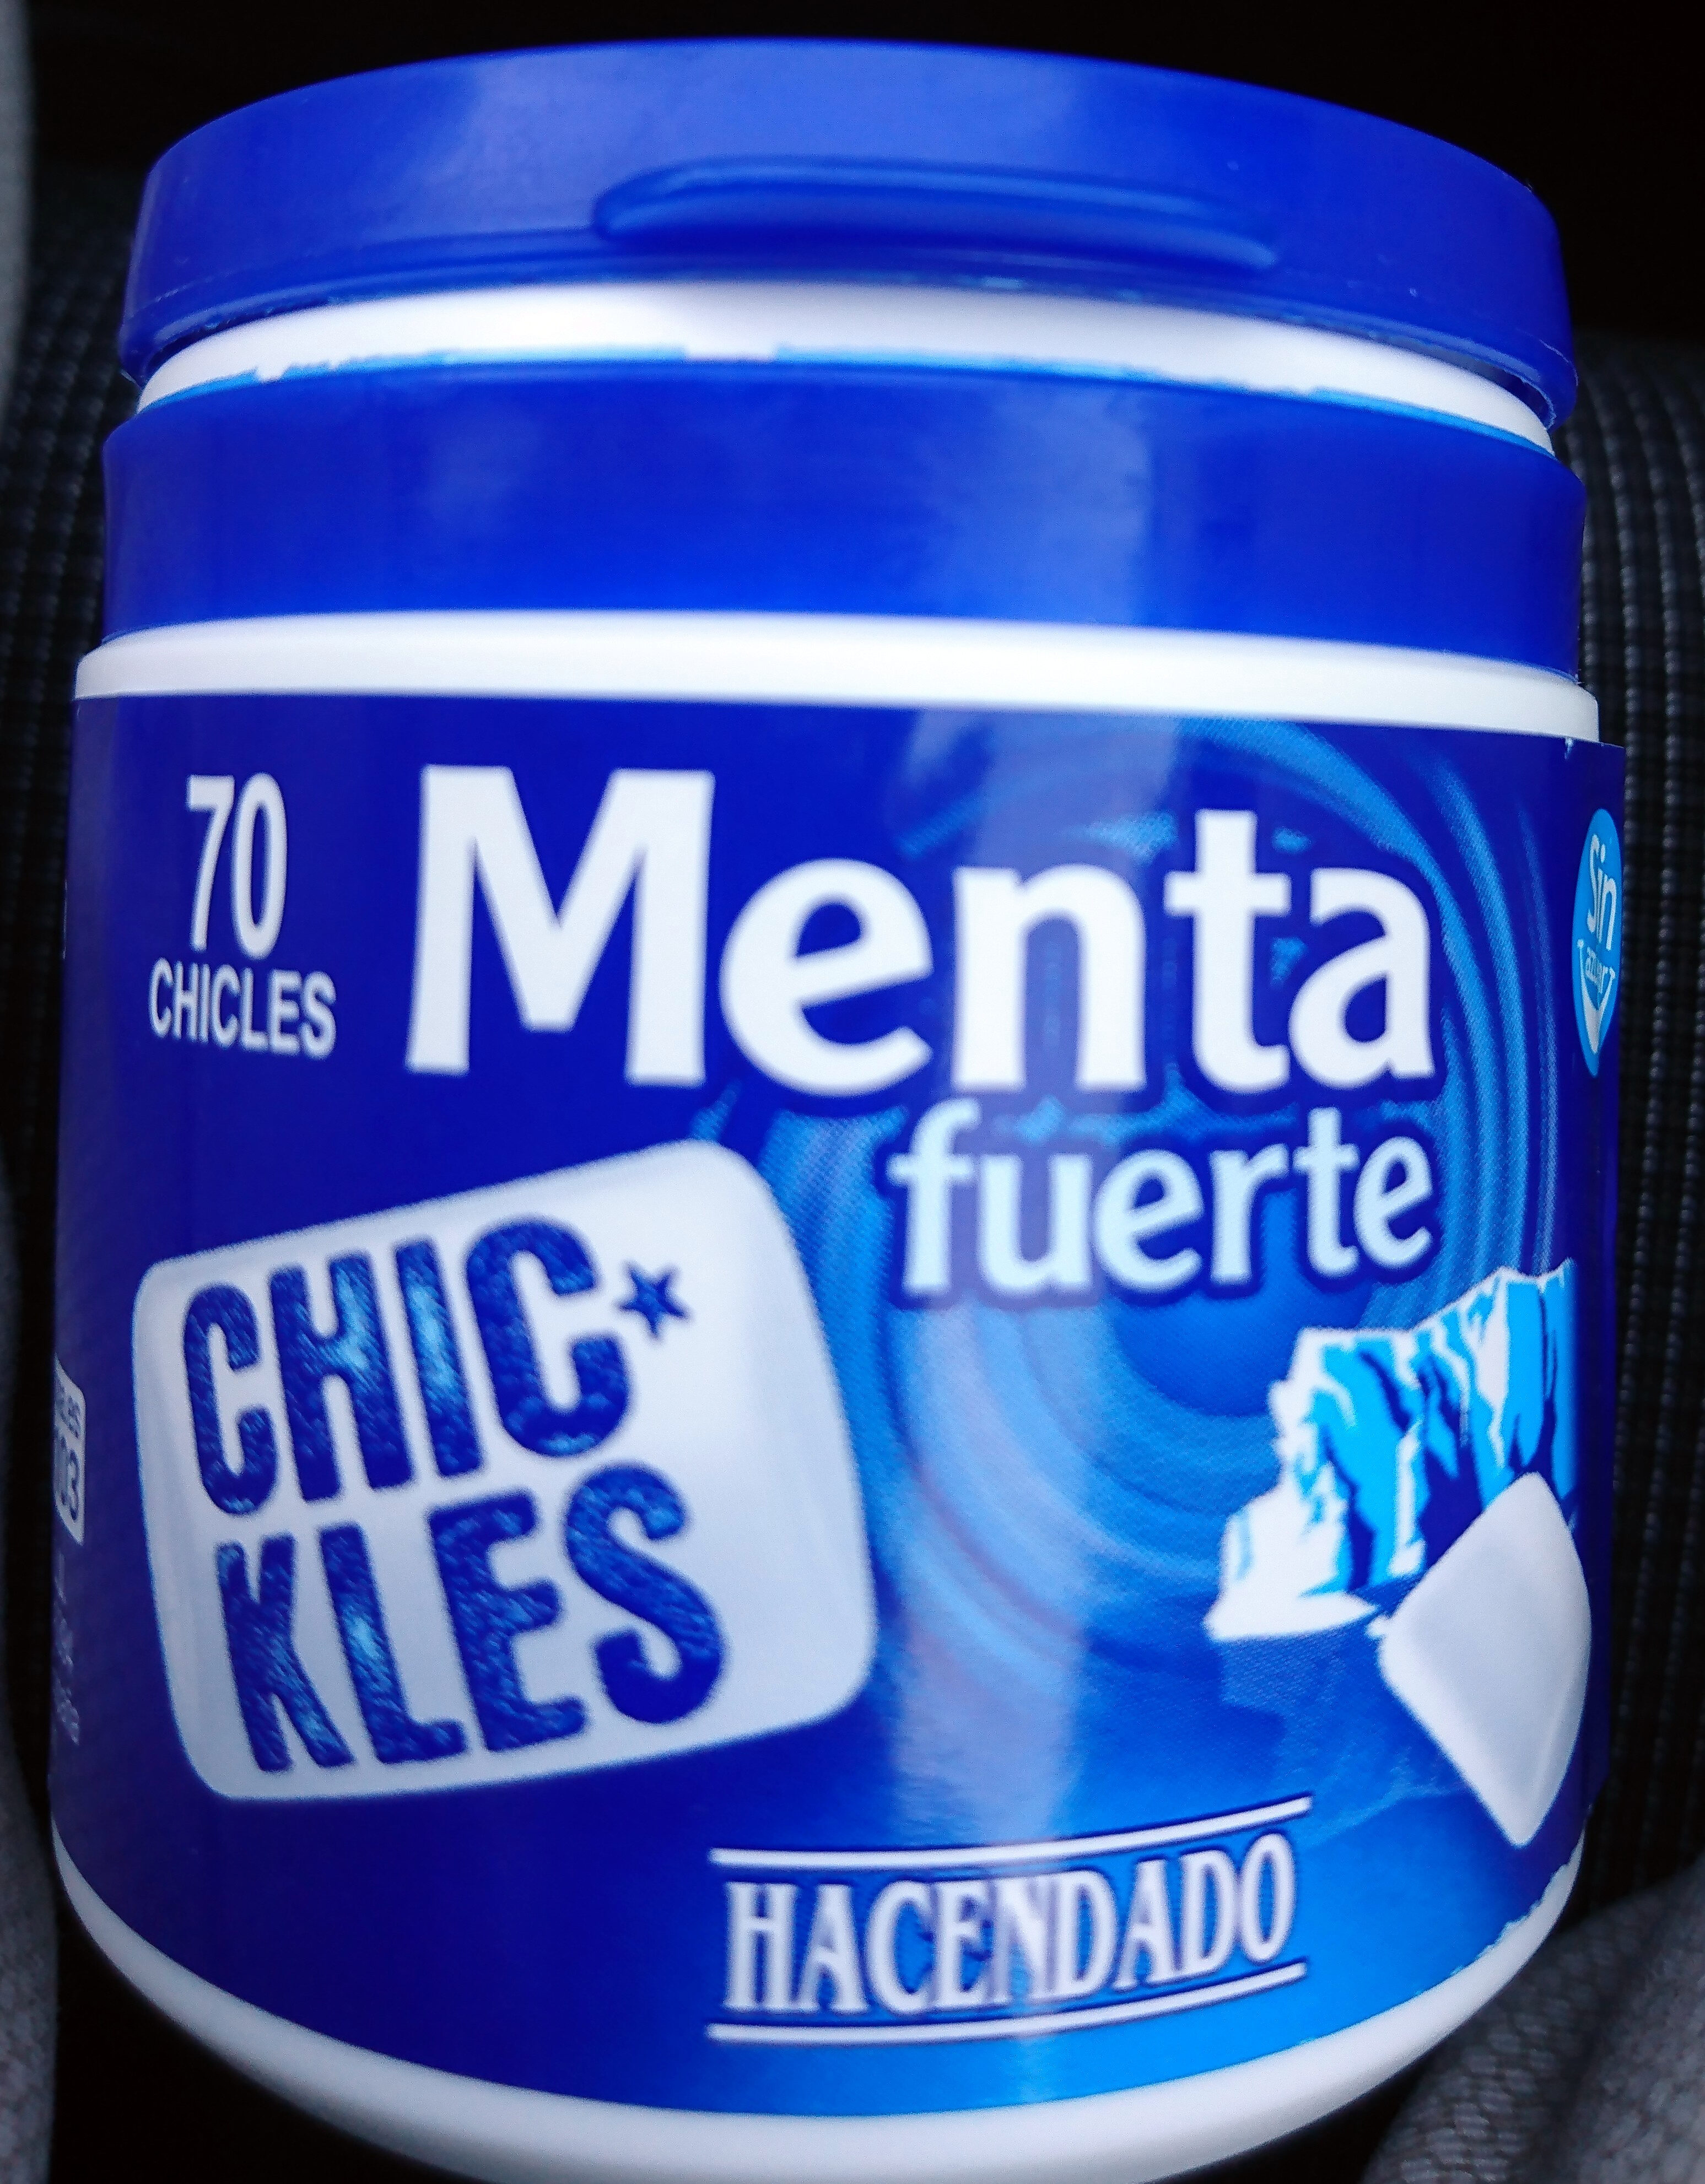 Chicles menta fuerte - Producto